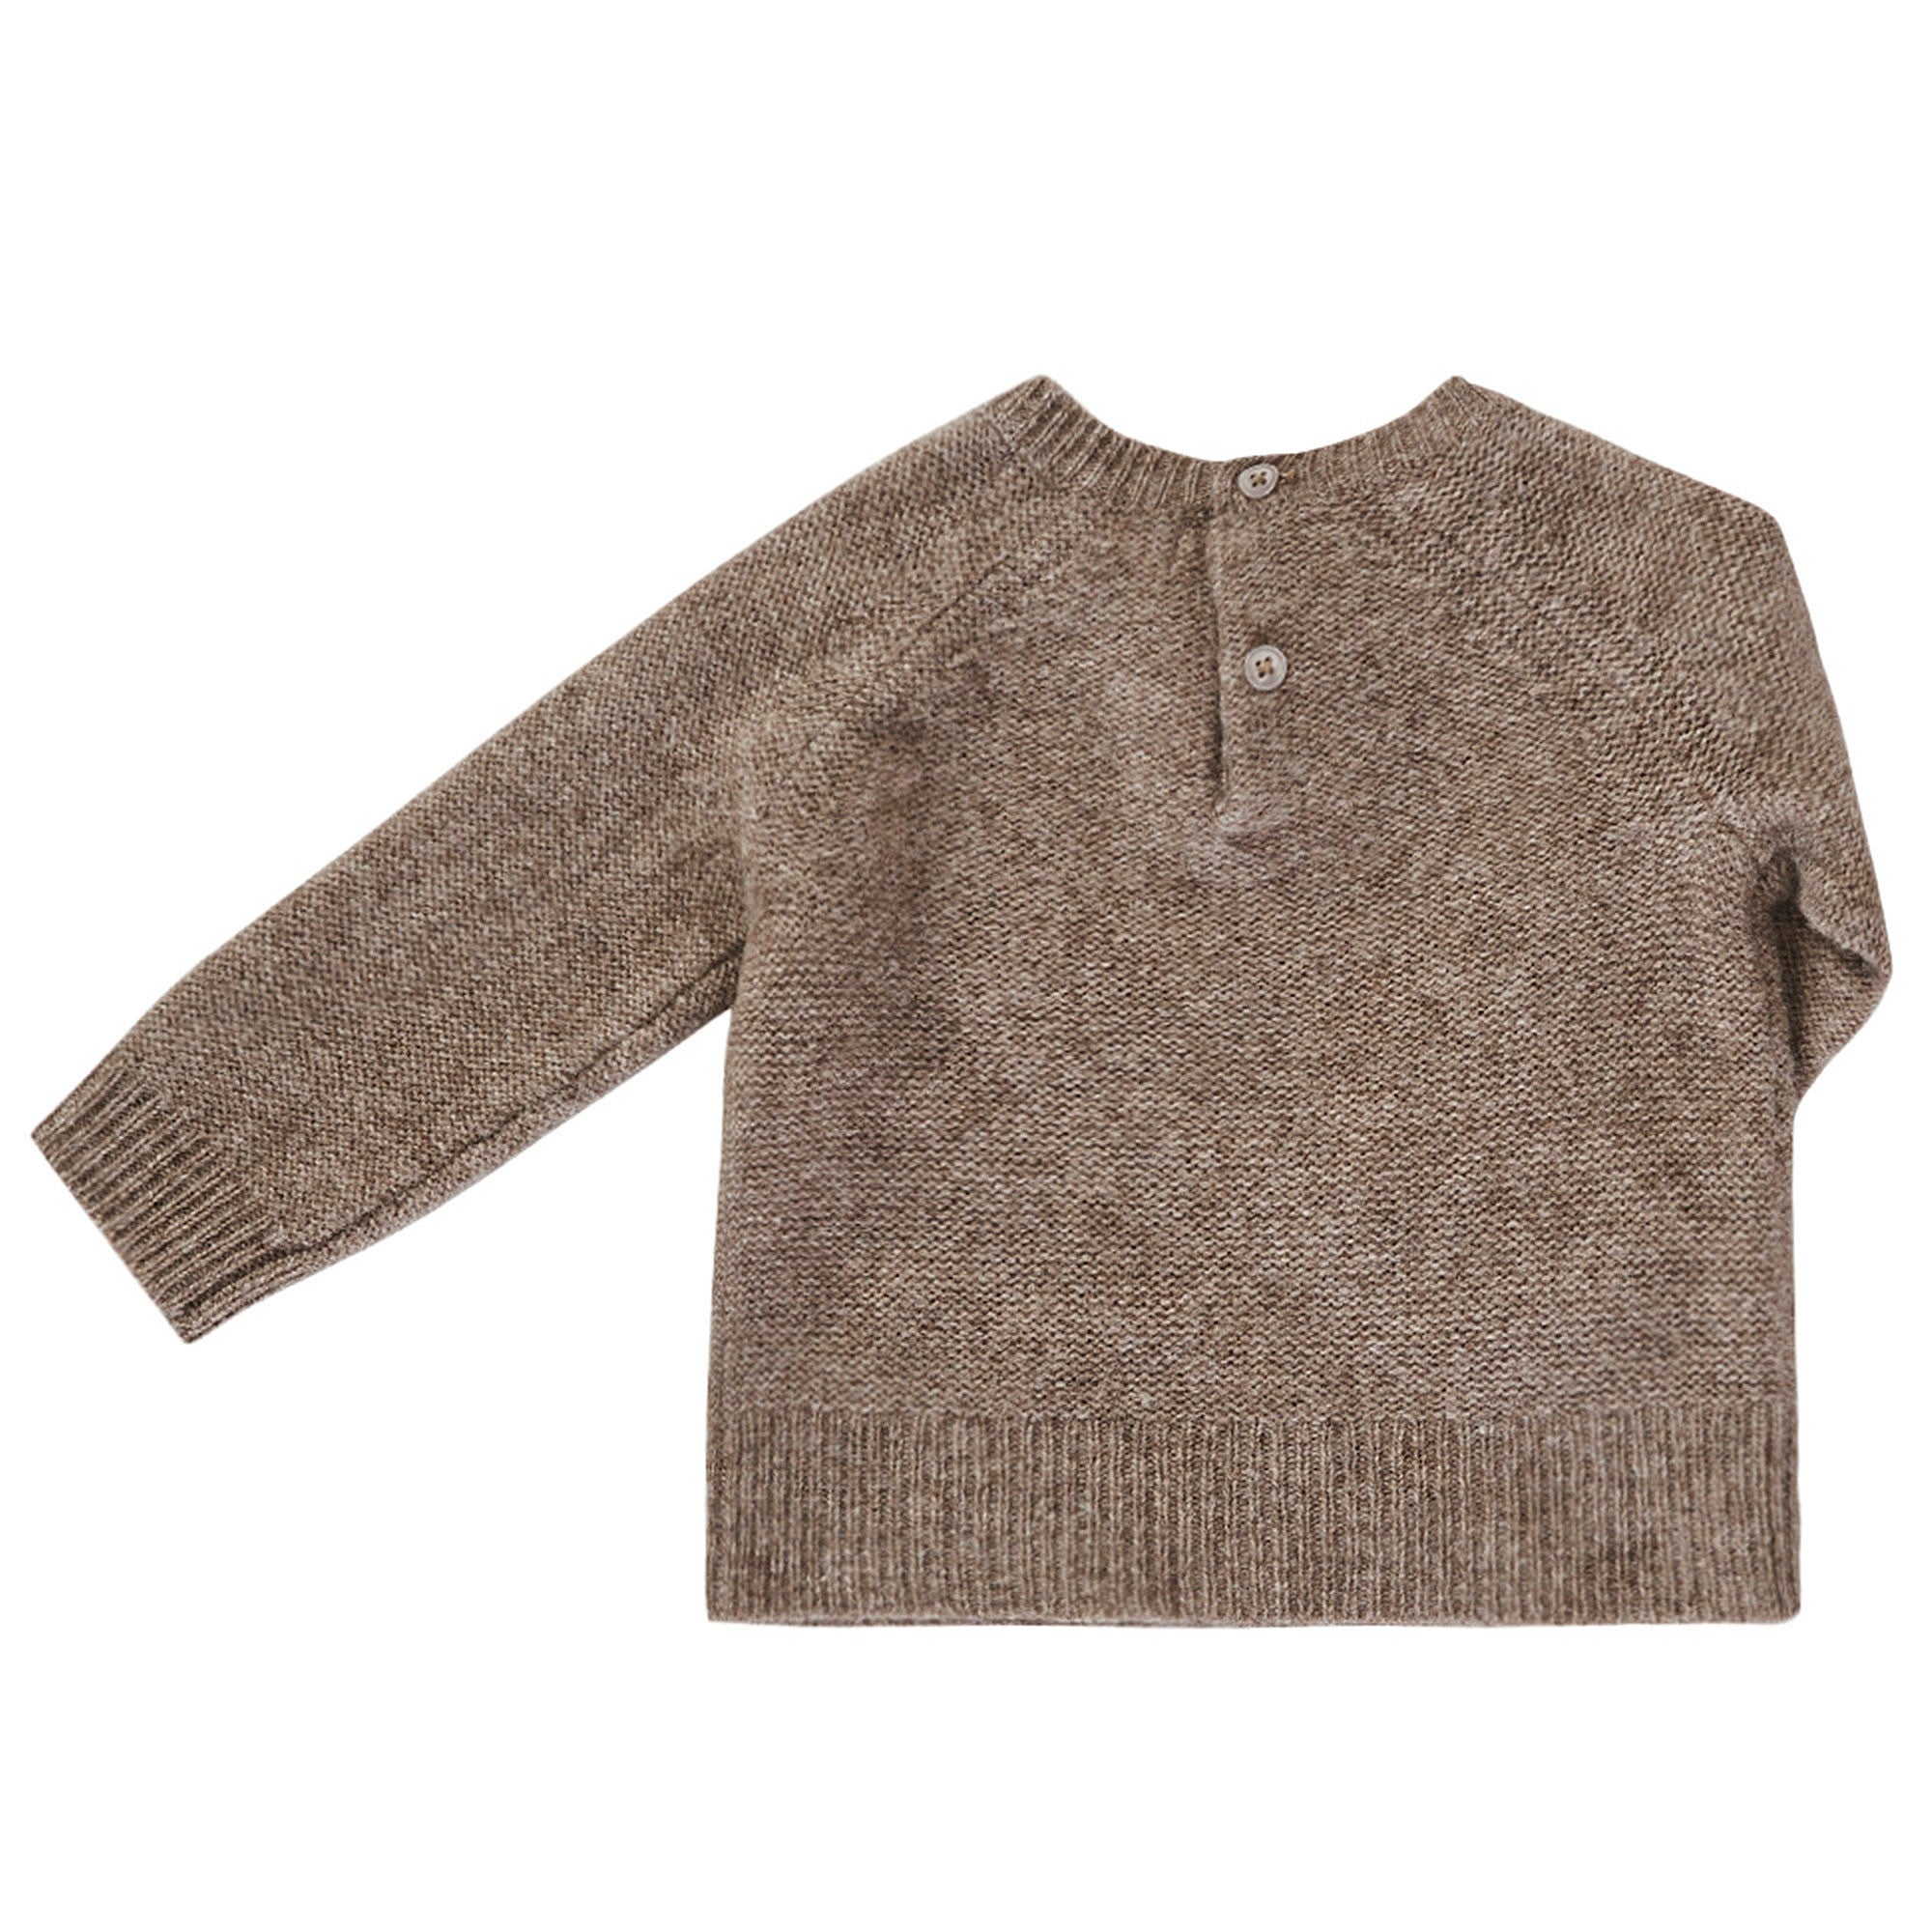 Baby Boys Grey Knitted Wool Sweater - CÉMAROSE | Children's Fashion Store - 2